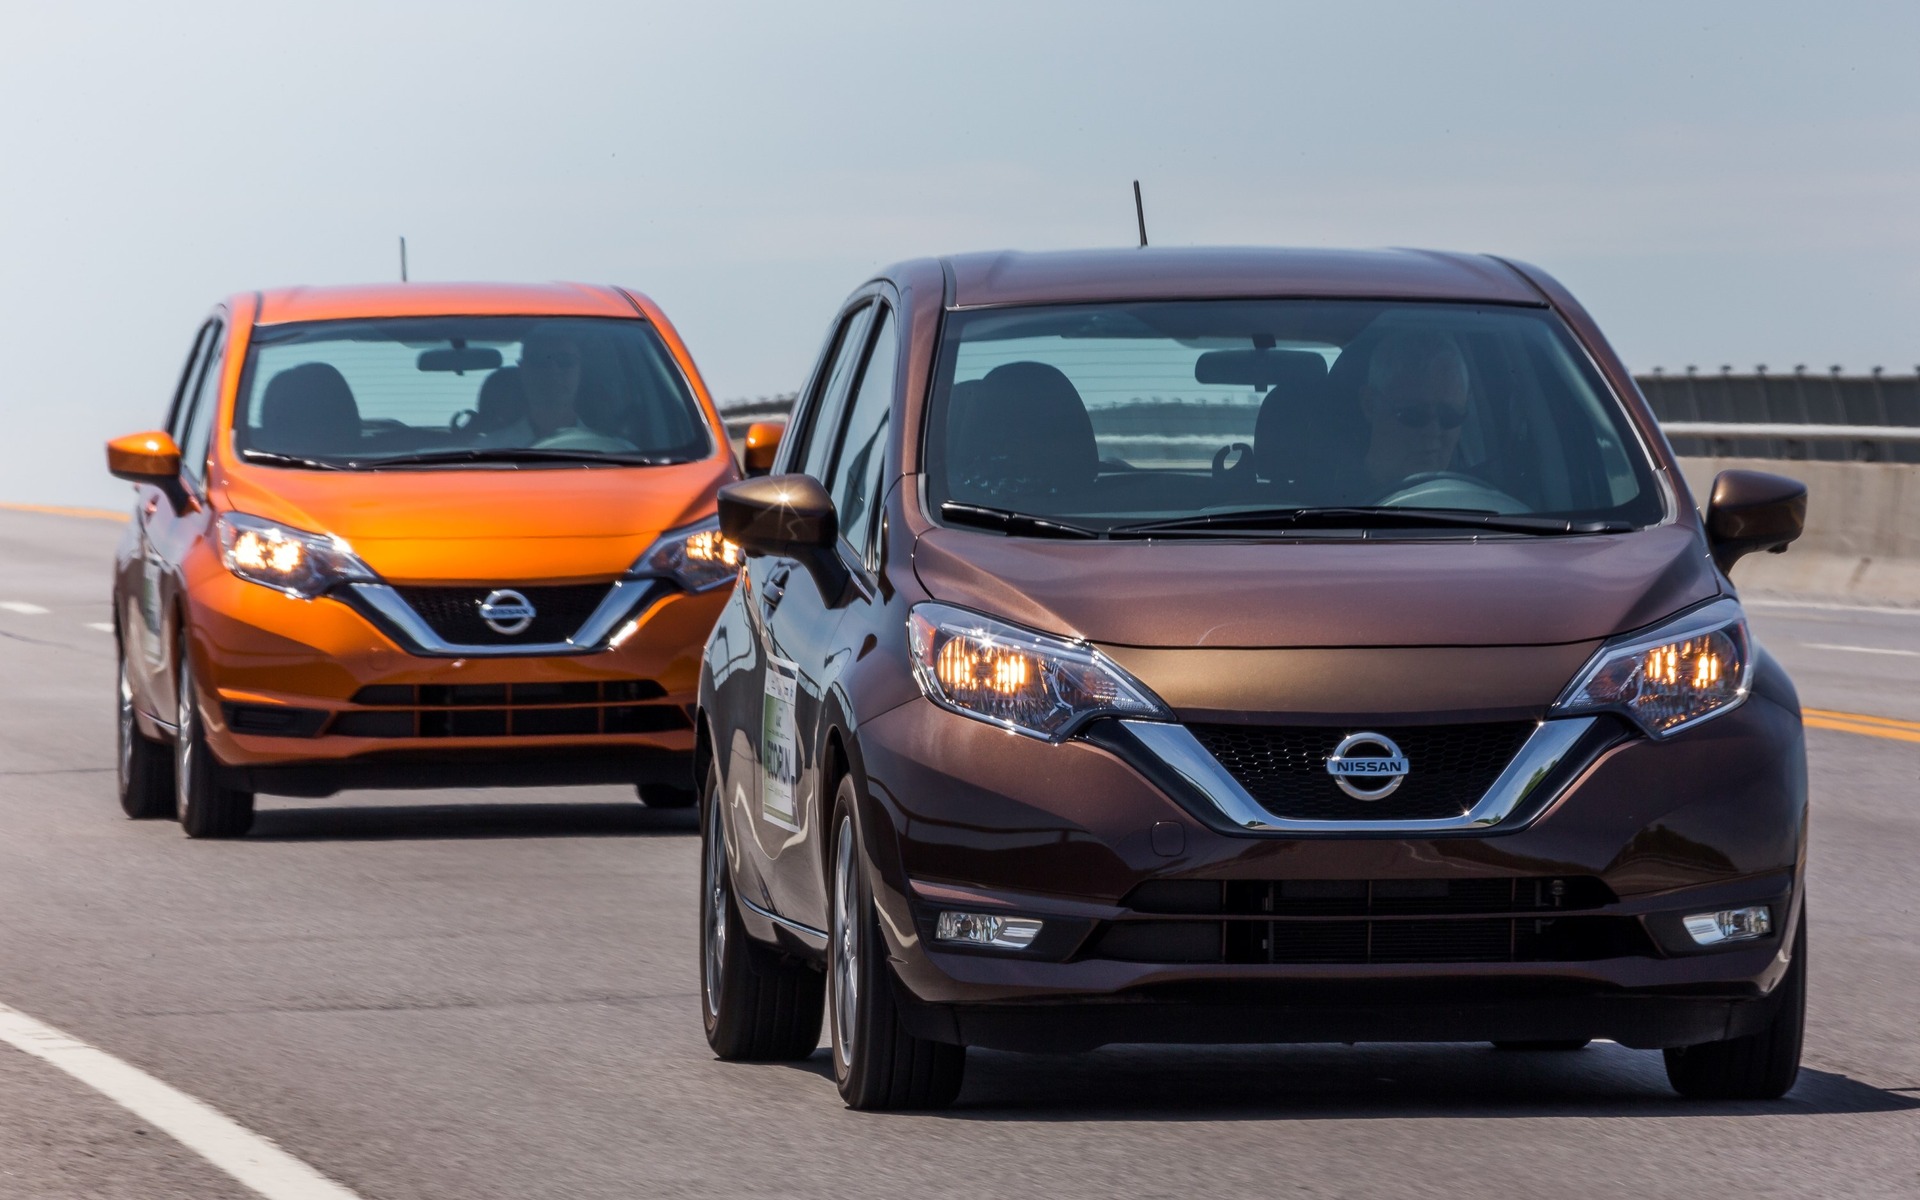 Nissan note 2020. Nissan Note 2017. Ниссан ноут 2020. Nissan Note 2019. Ниссан Верса 2020.